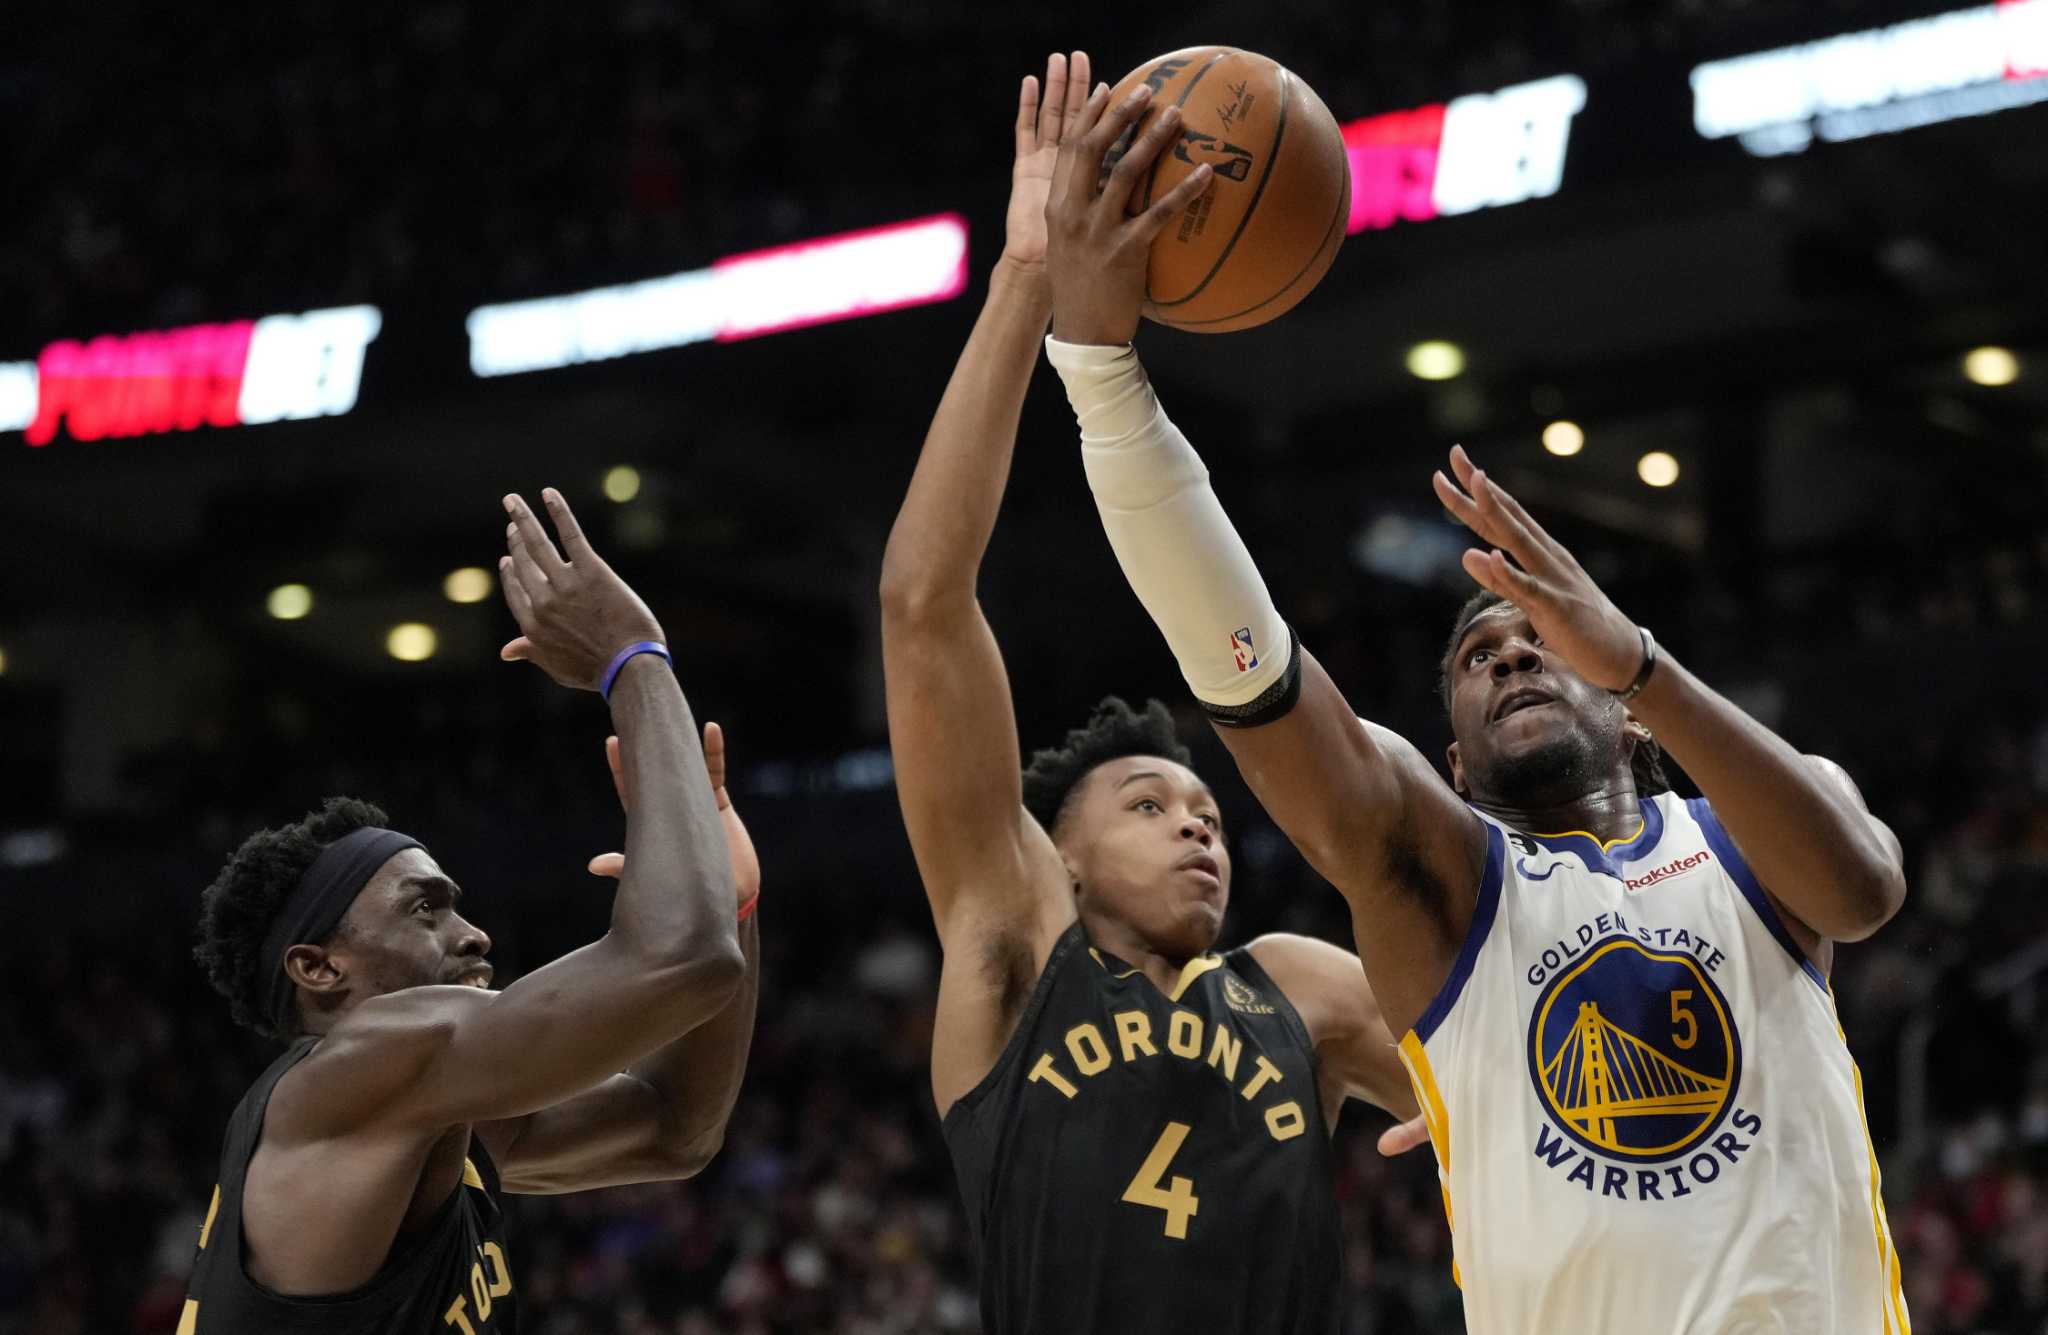 Stephen Curry, Warriors Big 3 changed the NBA, per Kevon Looney